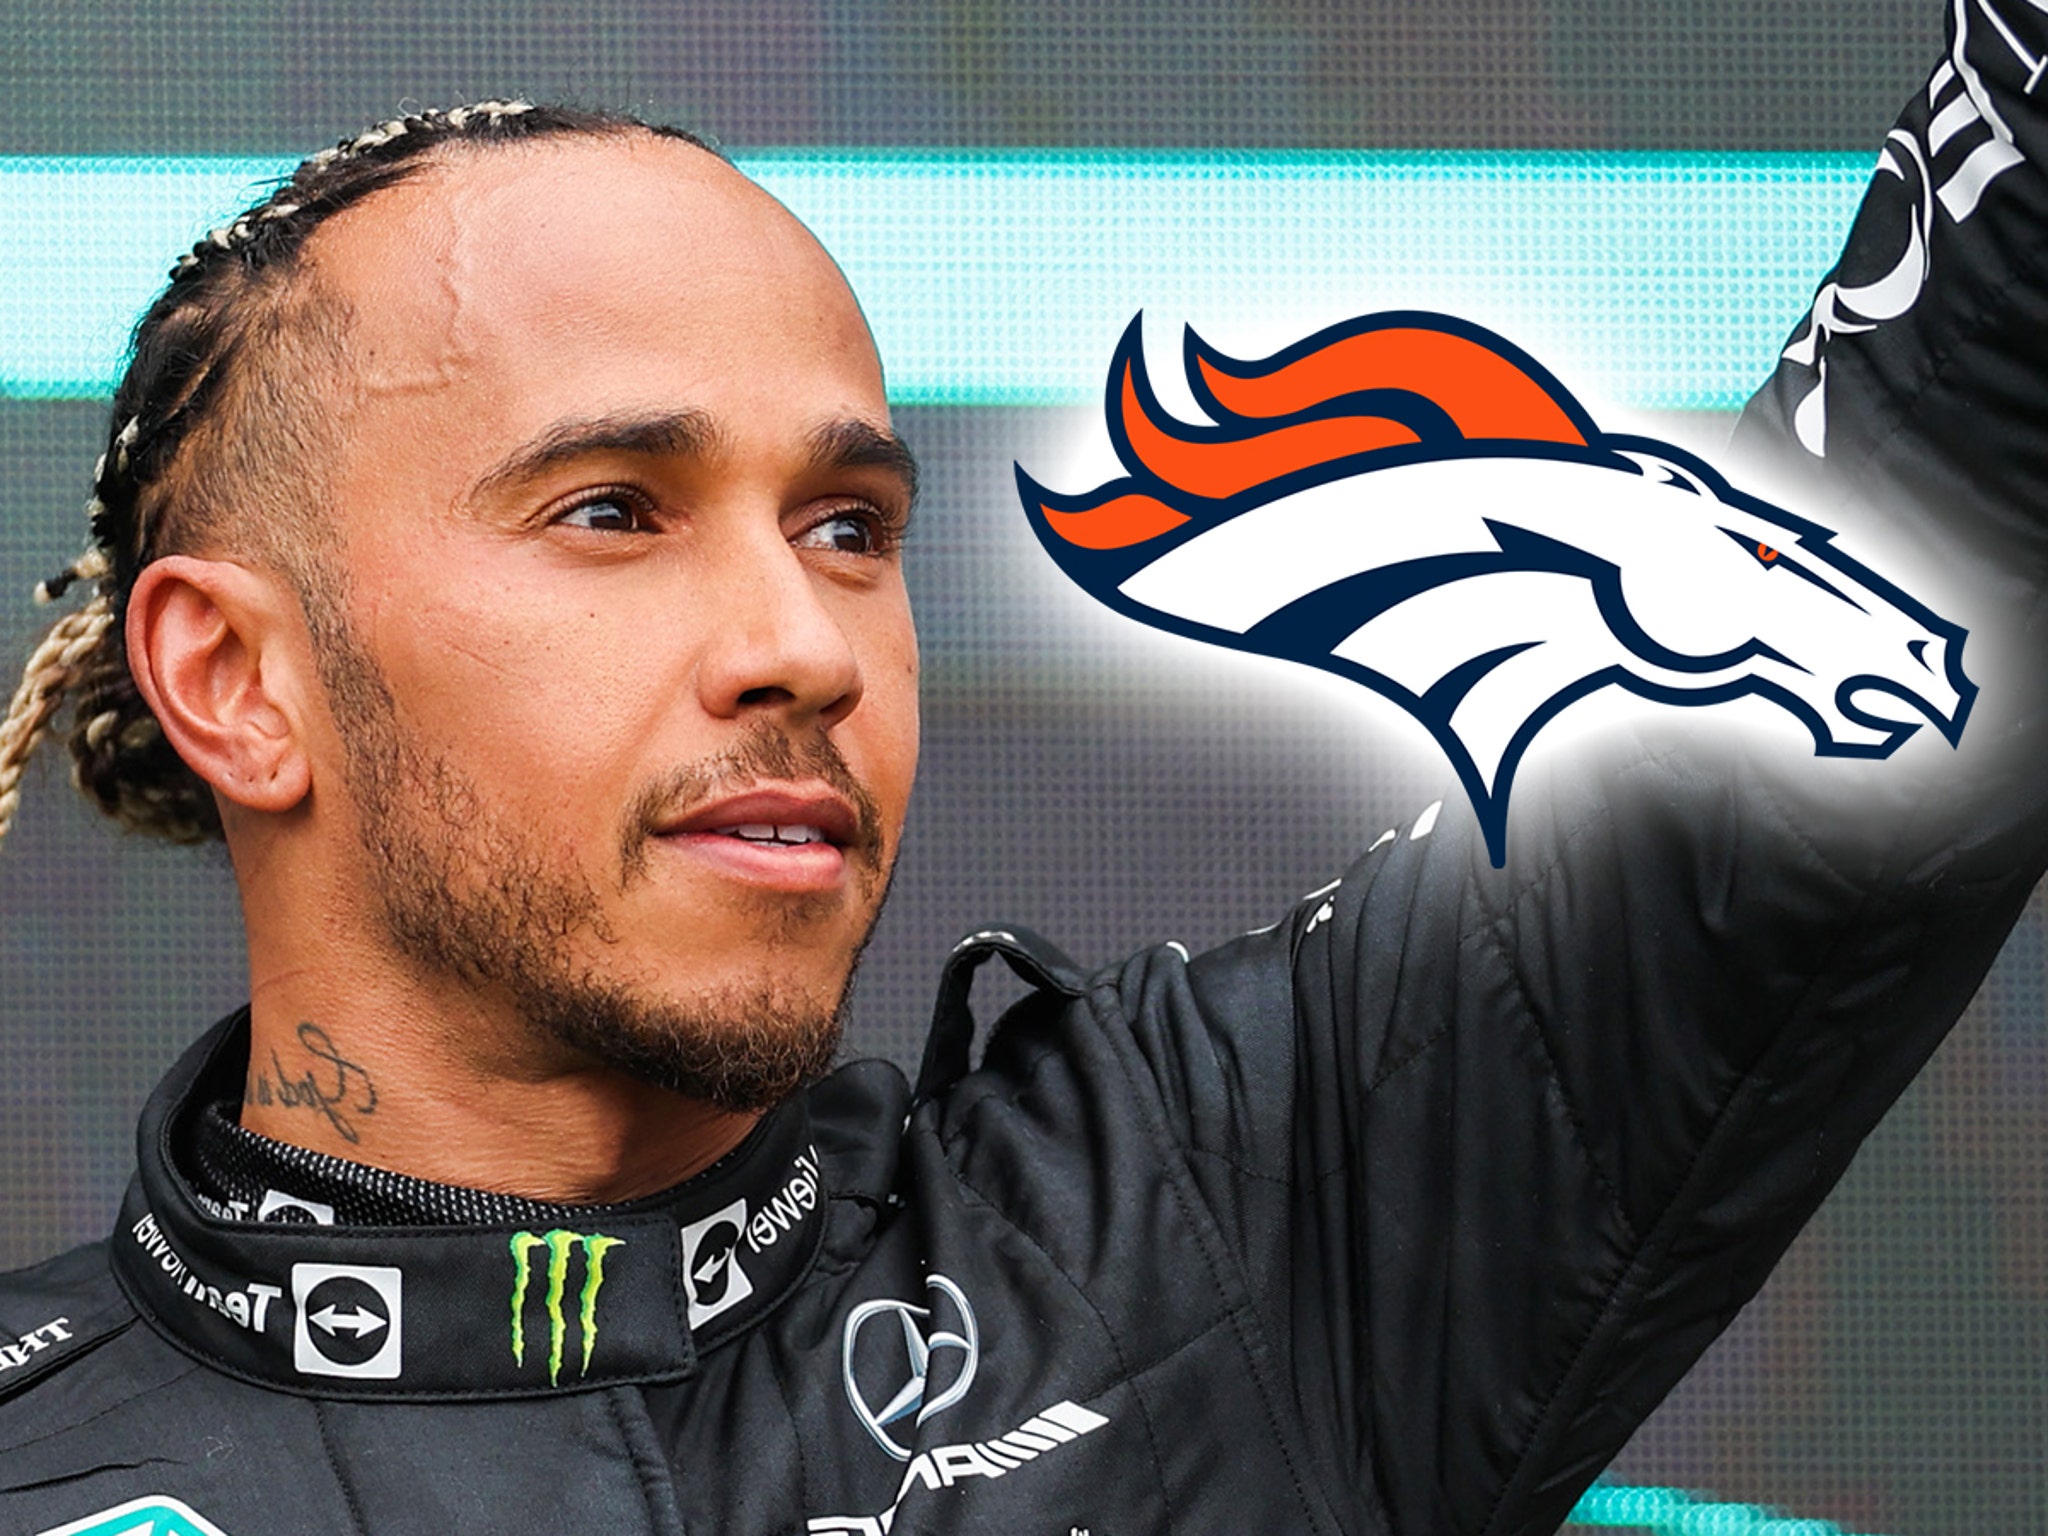 Lewis Hamilton Gifted Honorary Ball At First Broncos Game As Co-Owner